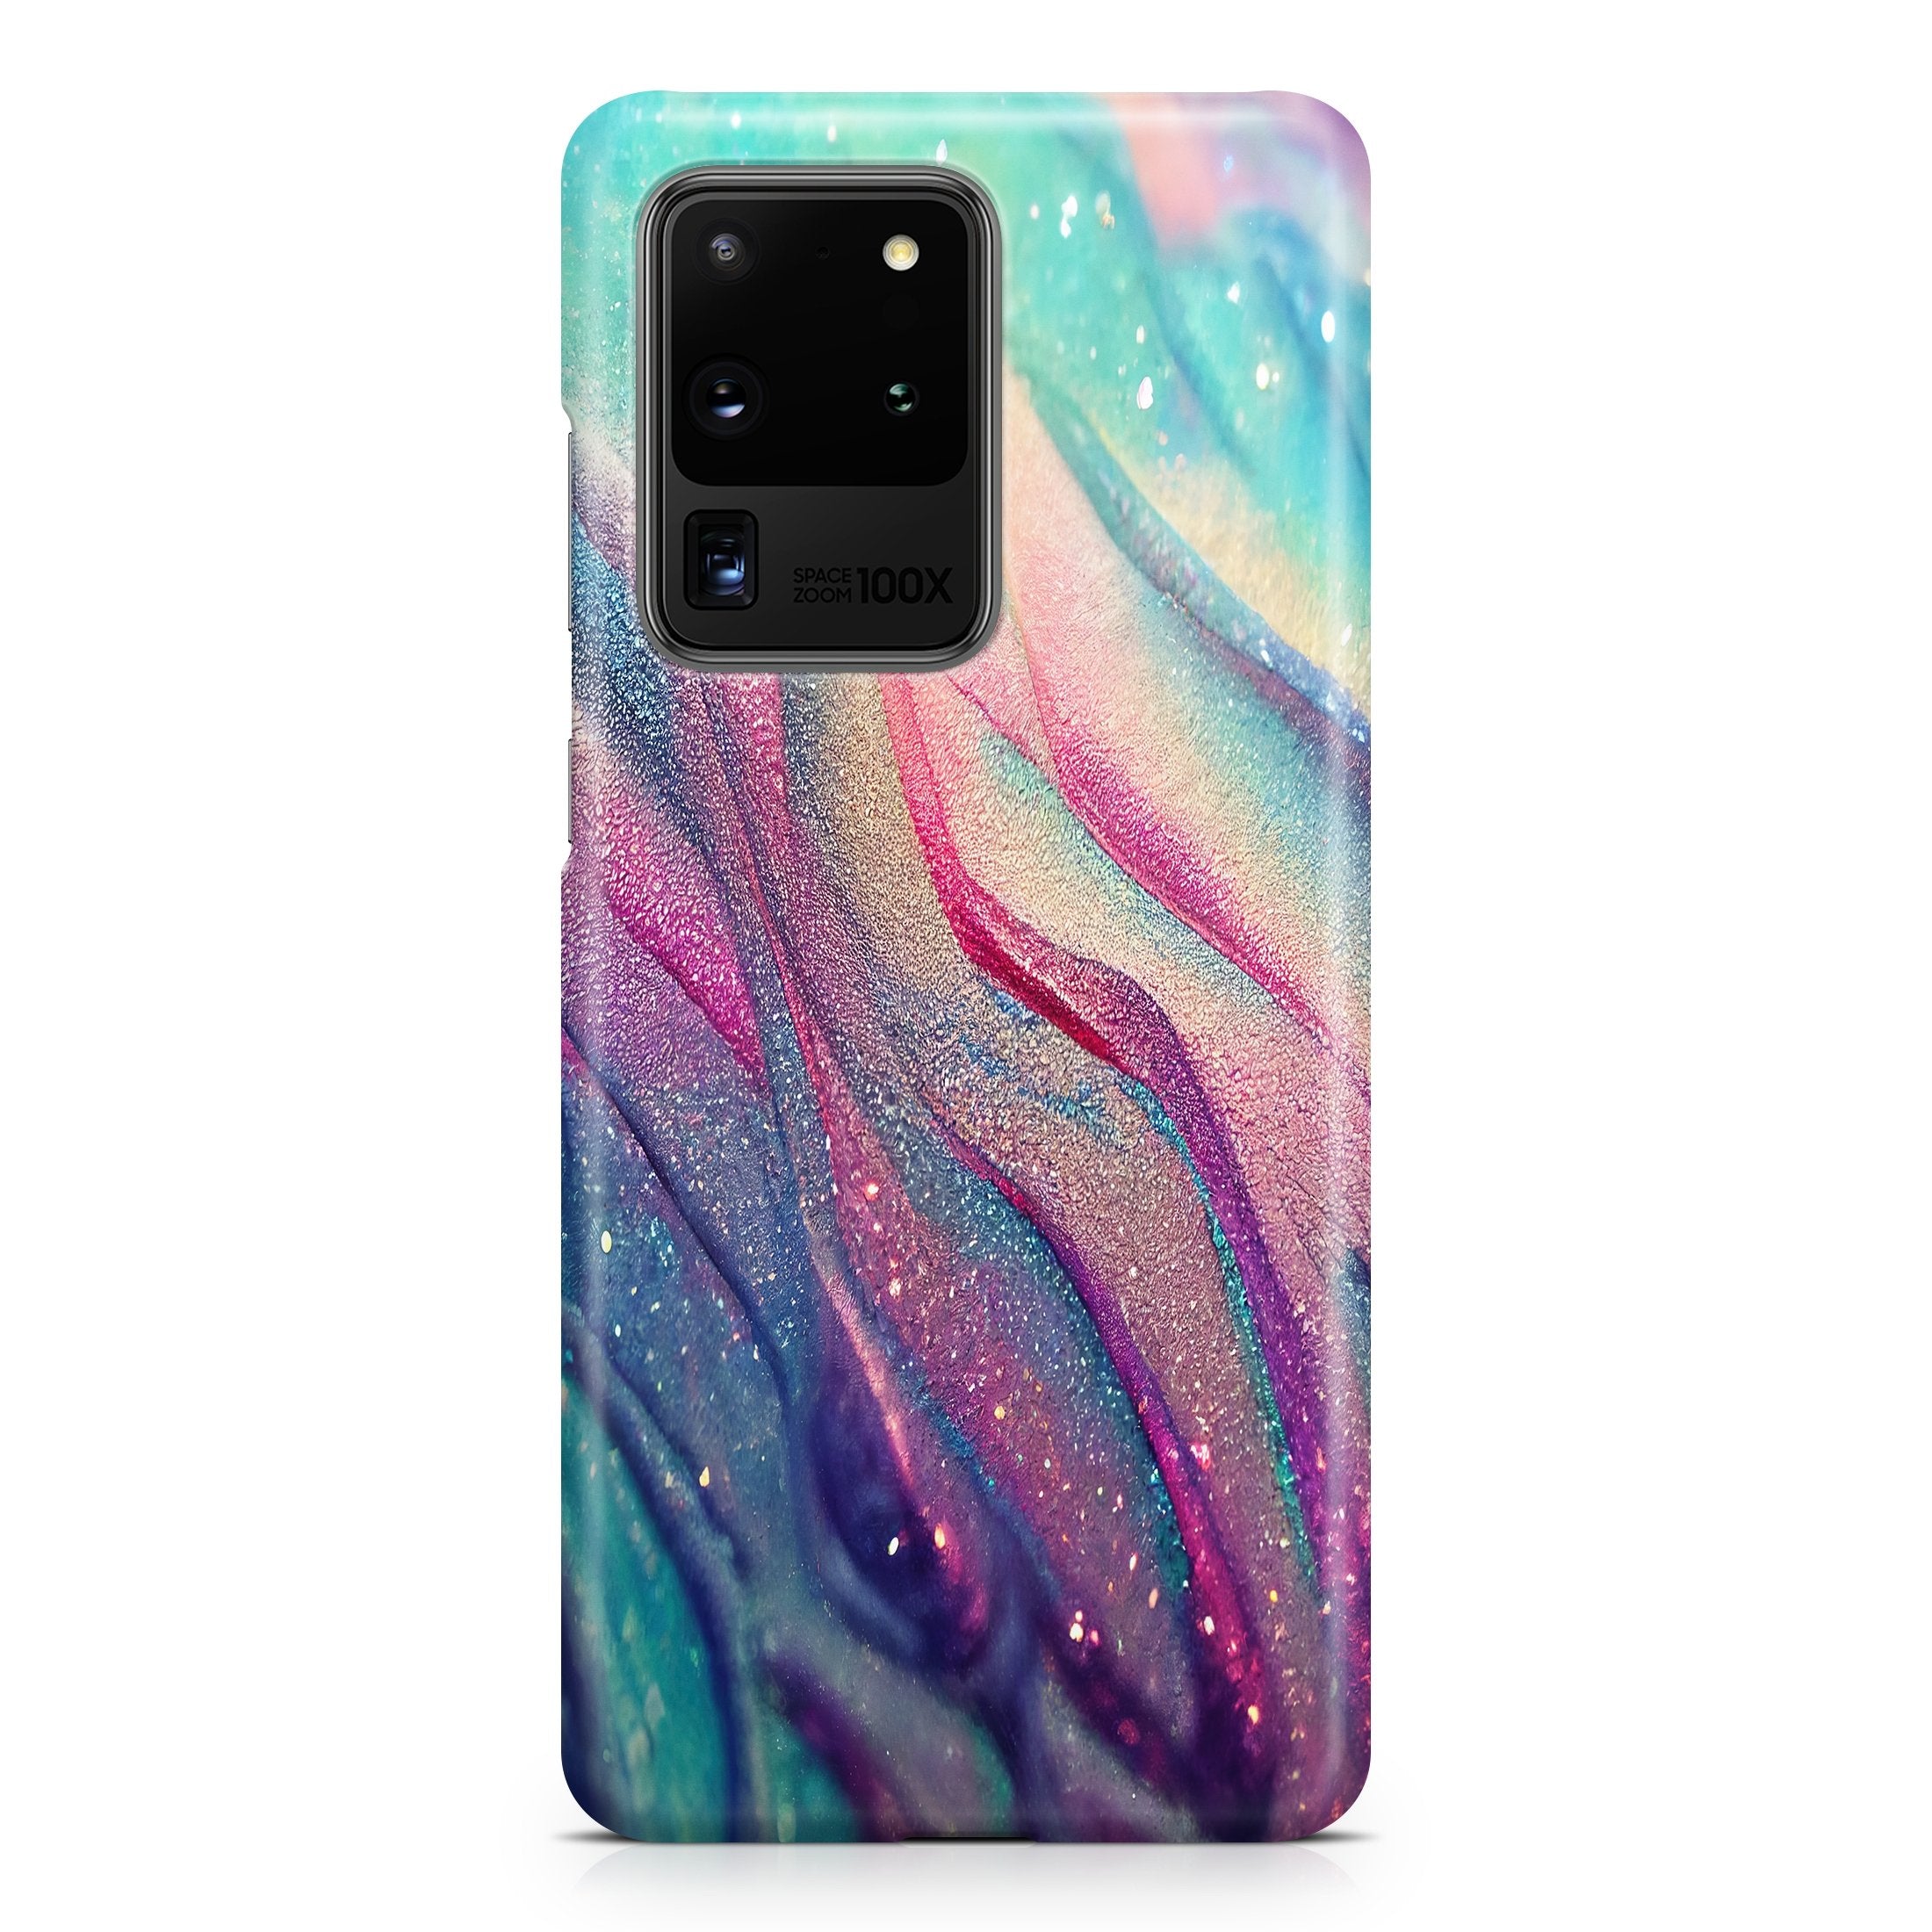 Tropical Sands - Samsung phone case designs by CaseSwagger